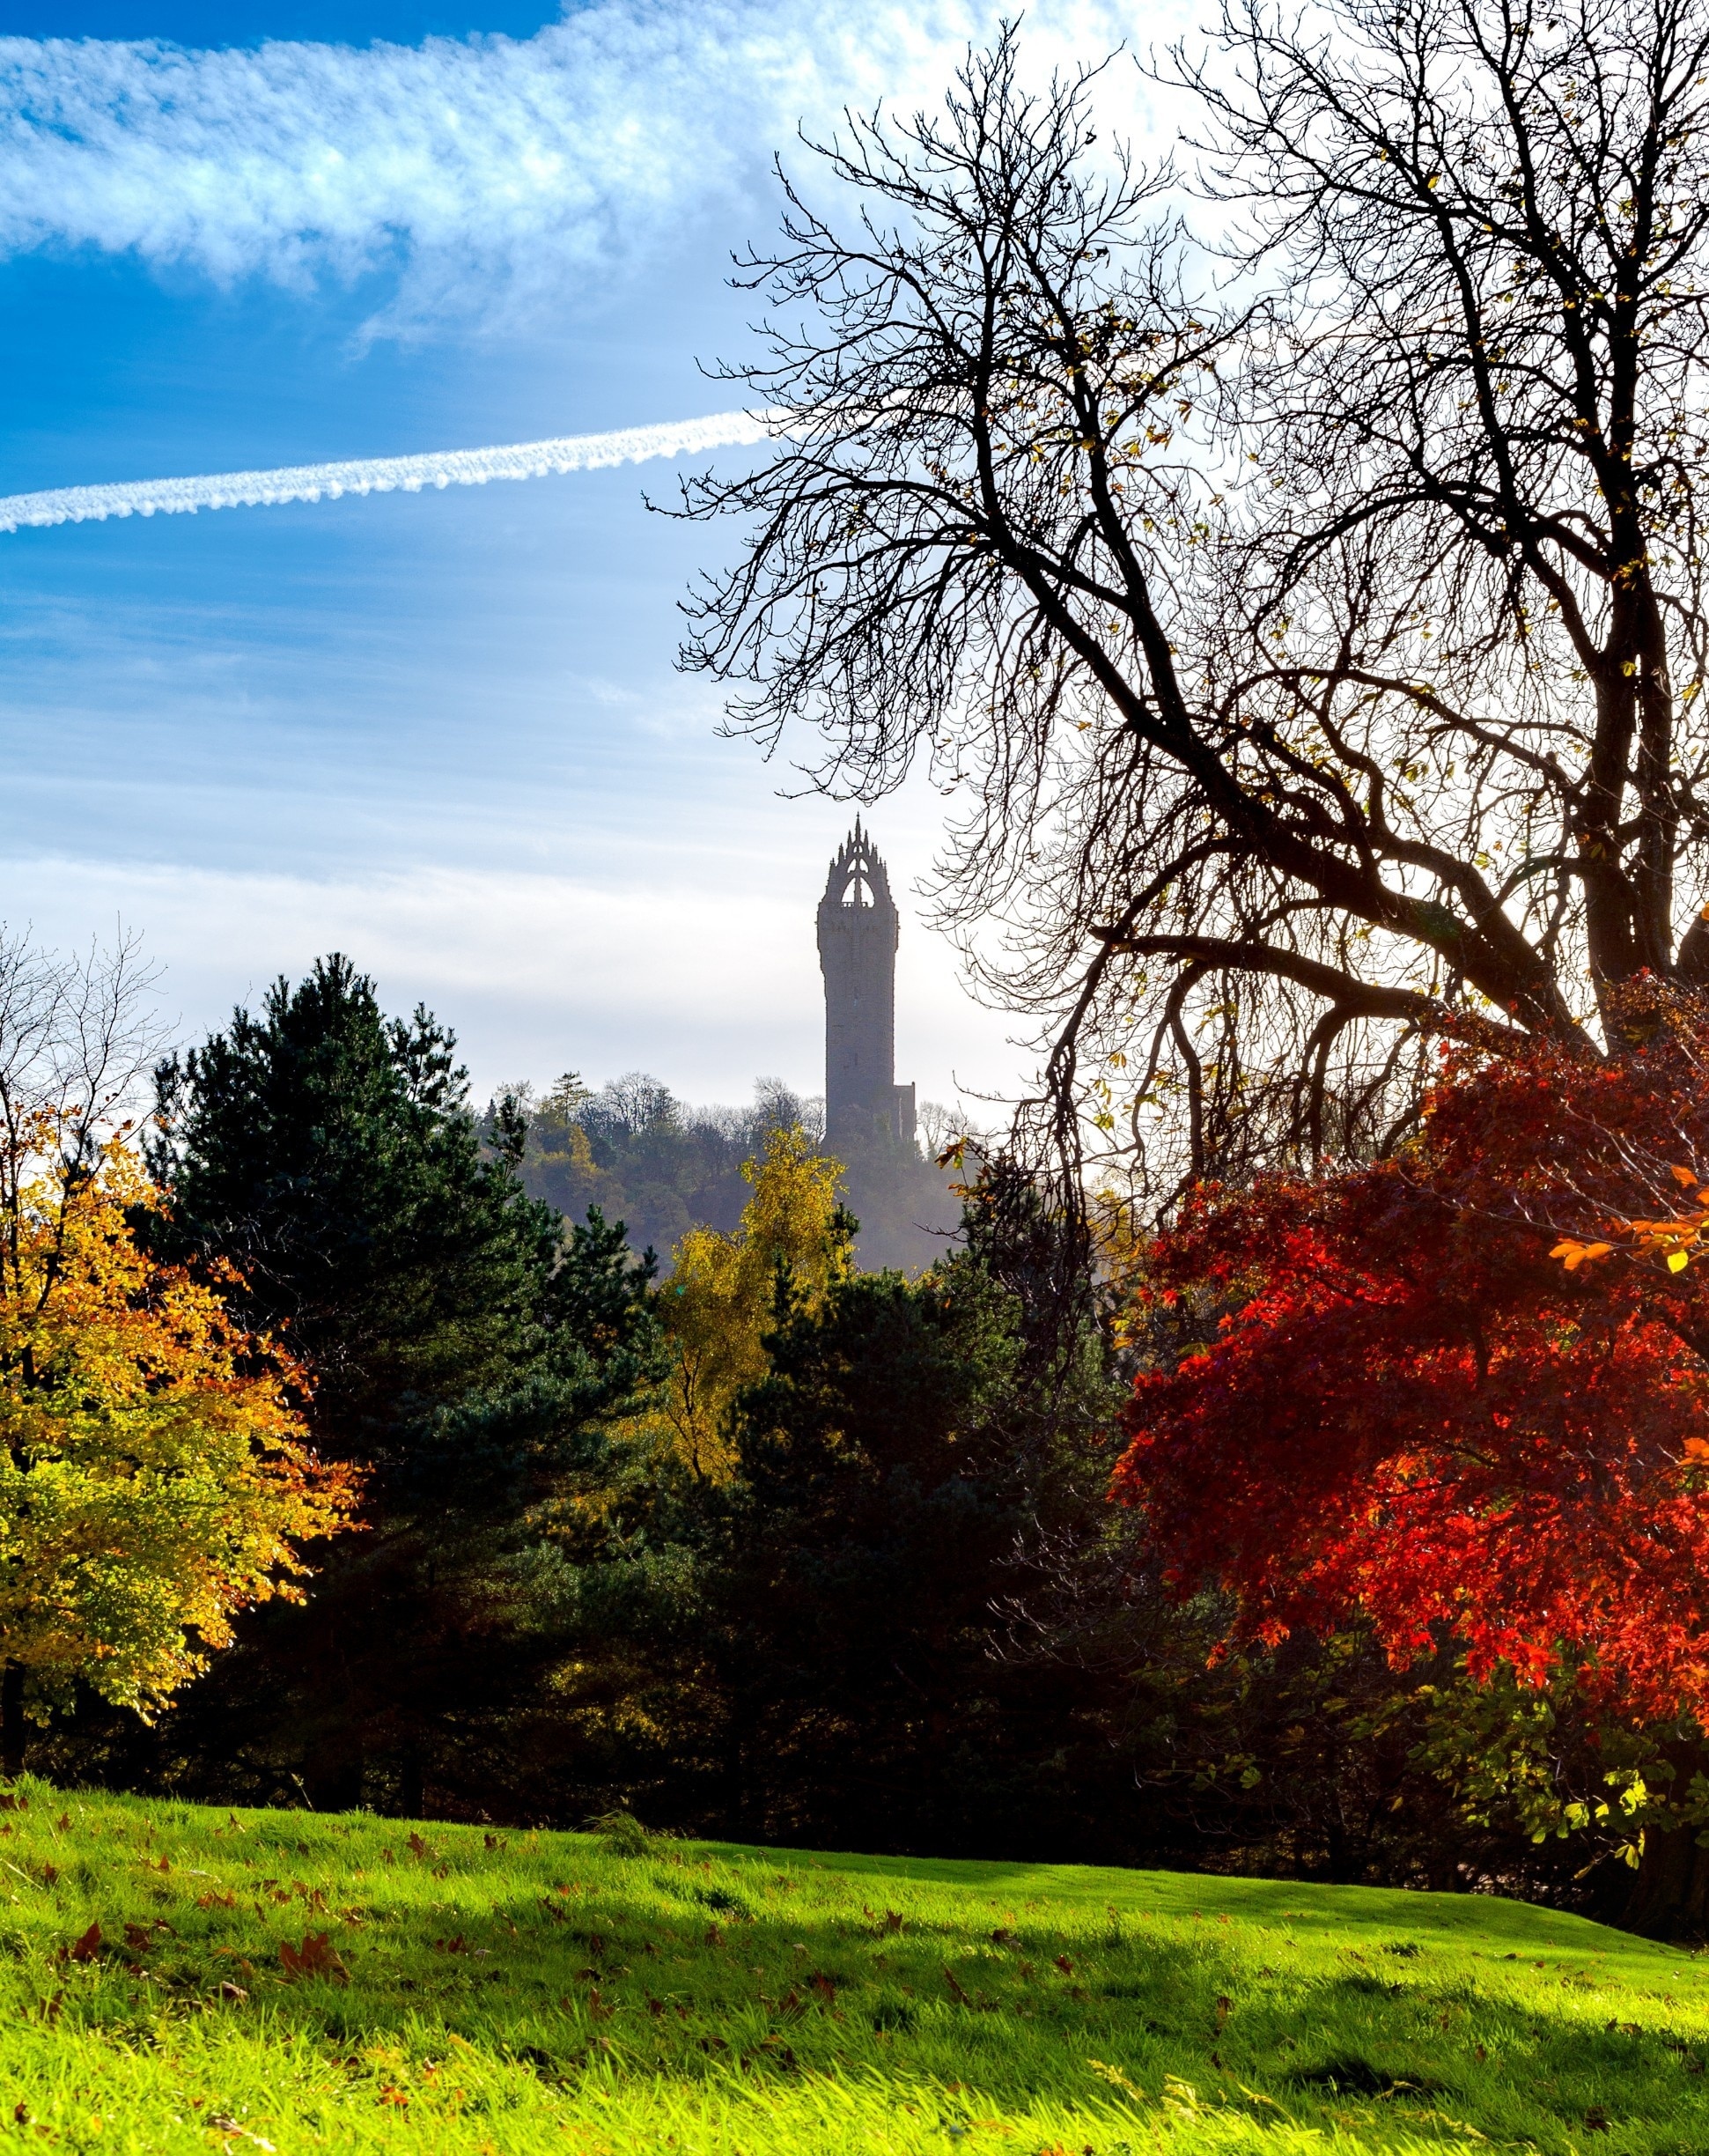 Wallace Monument seen from the University of Stirling